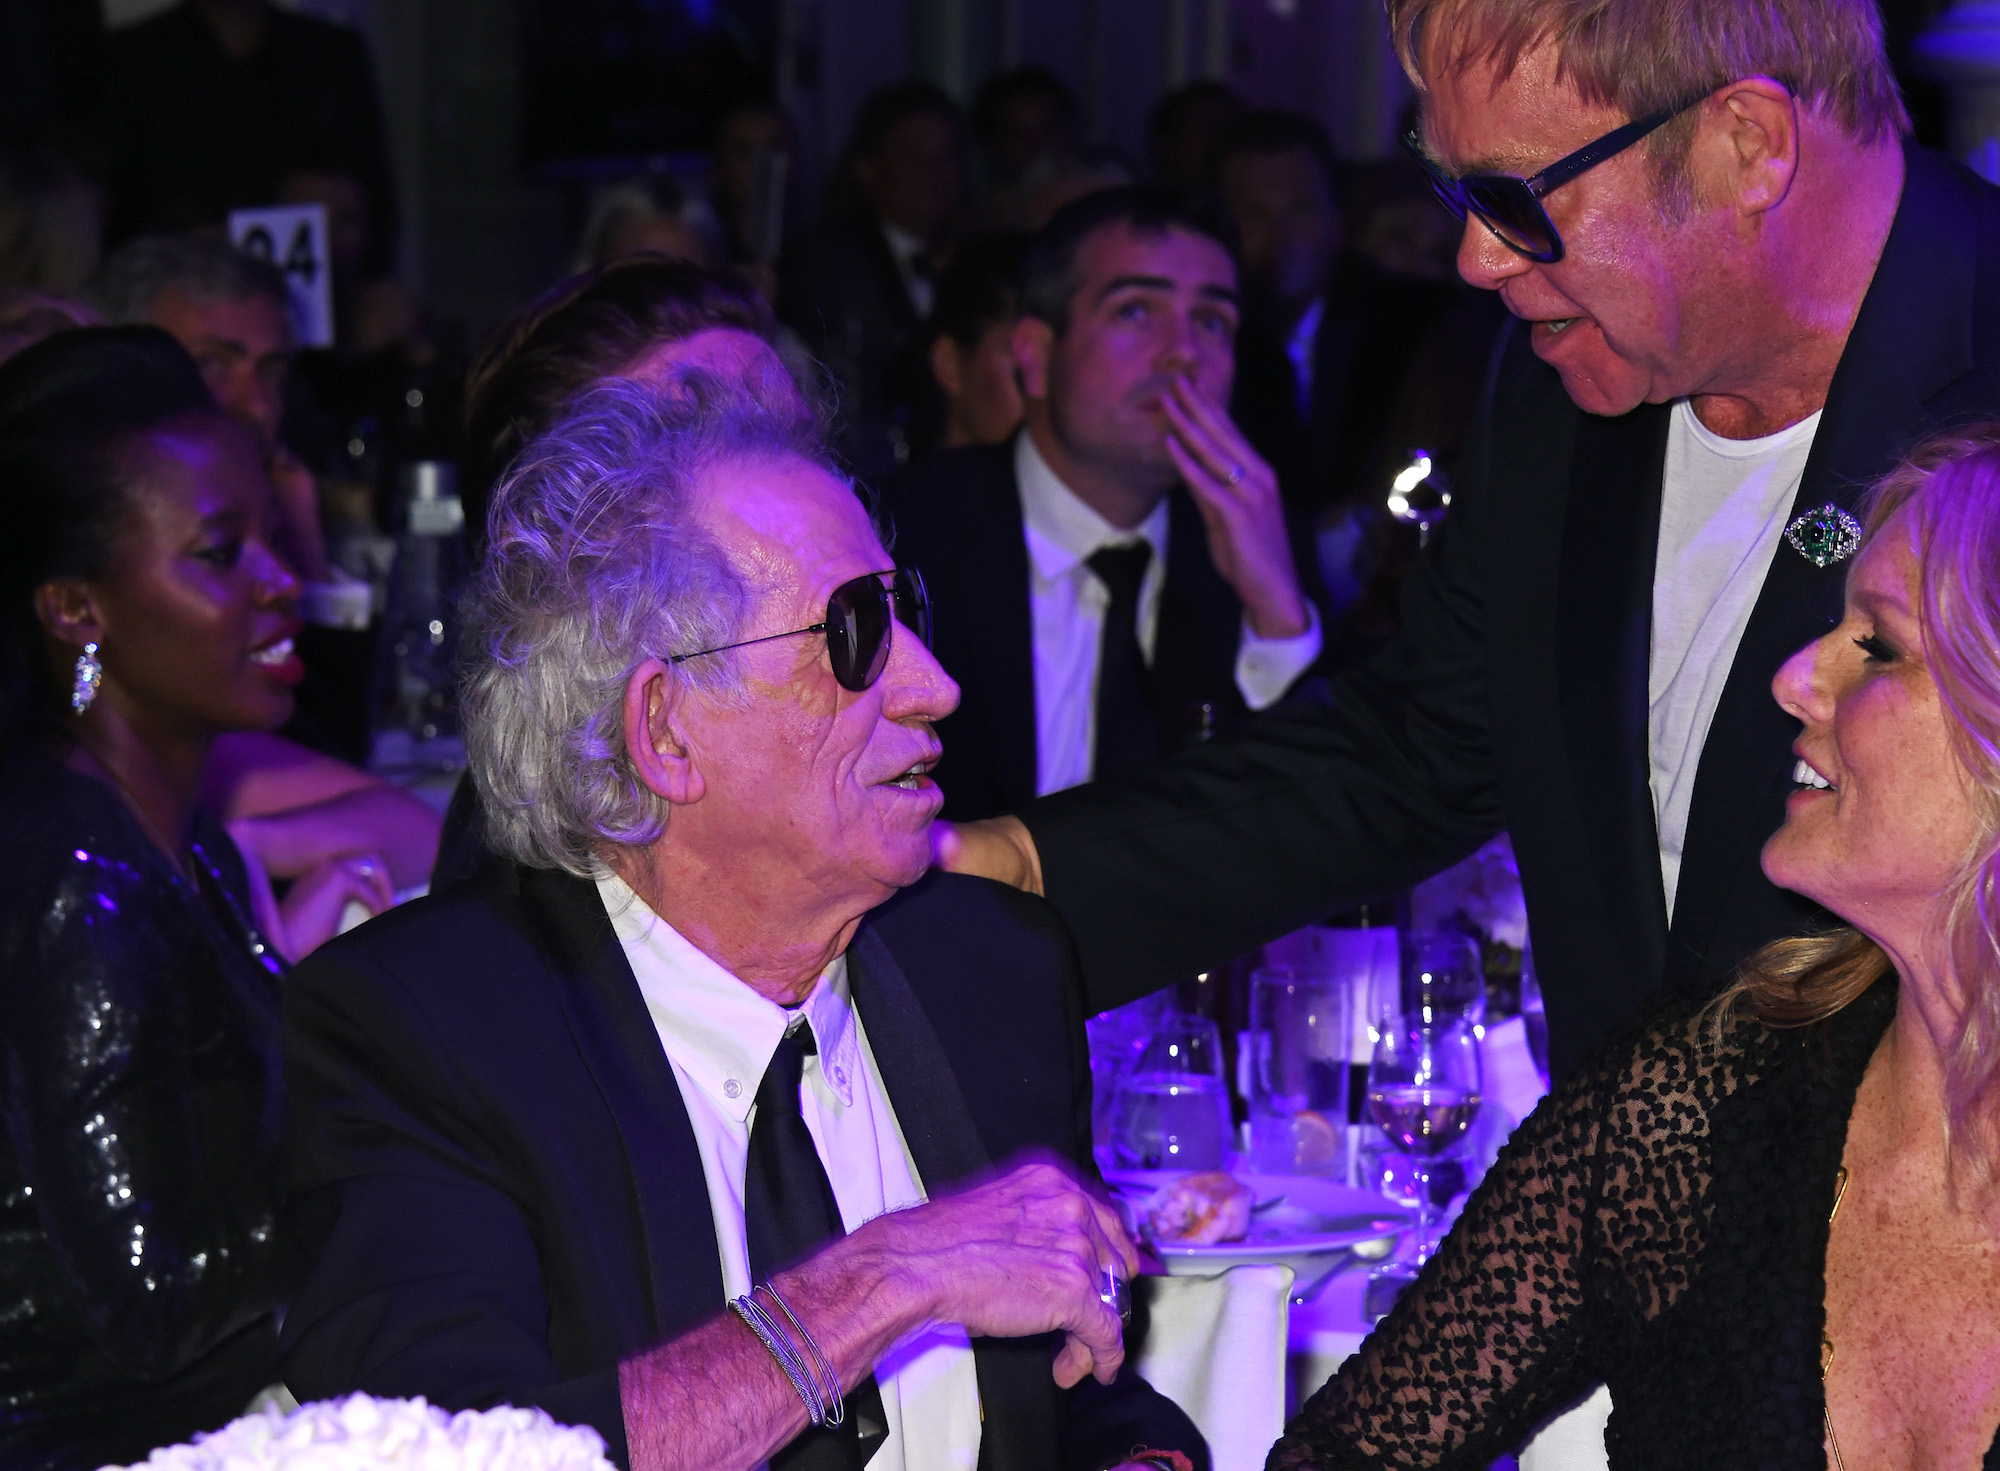 Keith Richards and Elton John greet each other at the GQ Men of the Year Awards in 2015